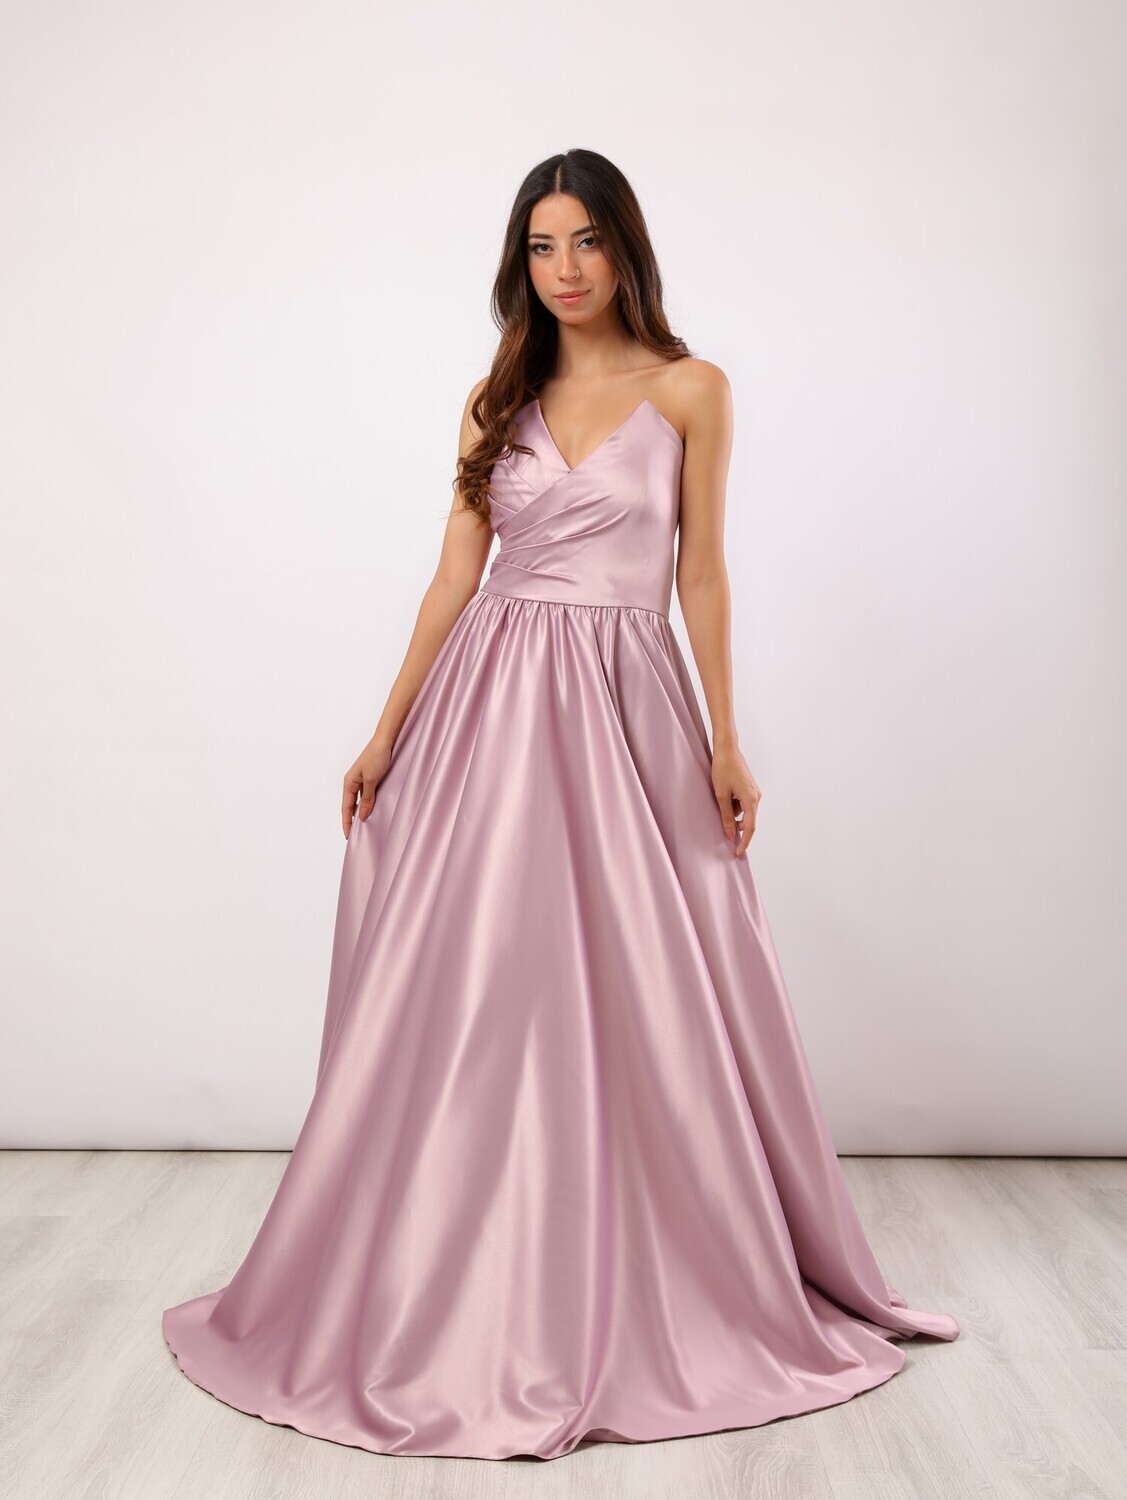 evening-gown-strapless-fit-flare-8535